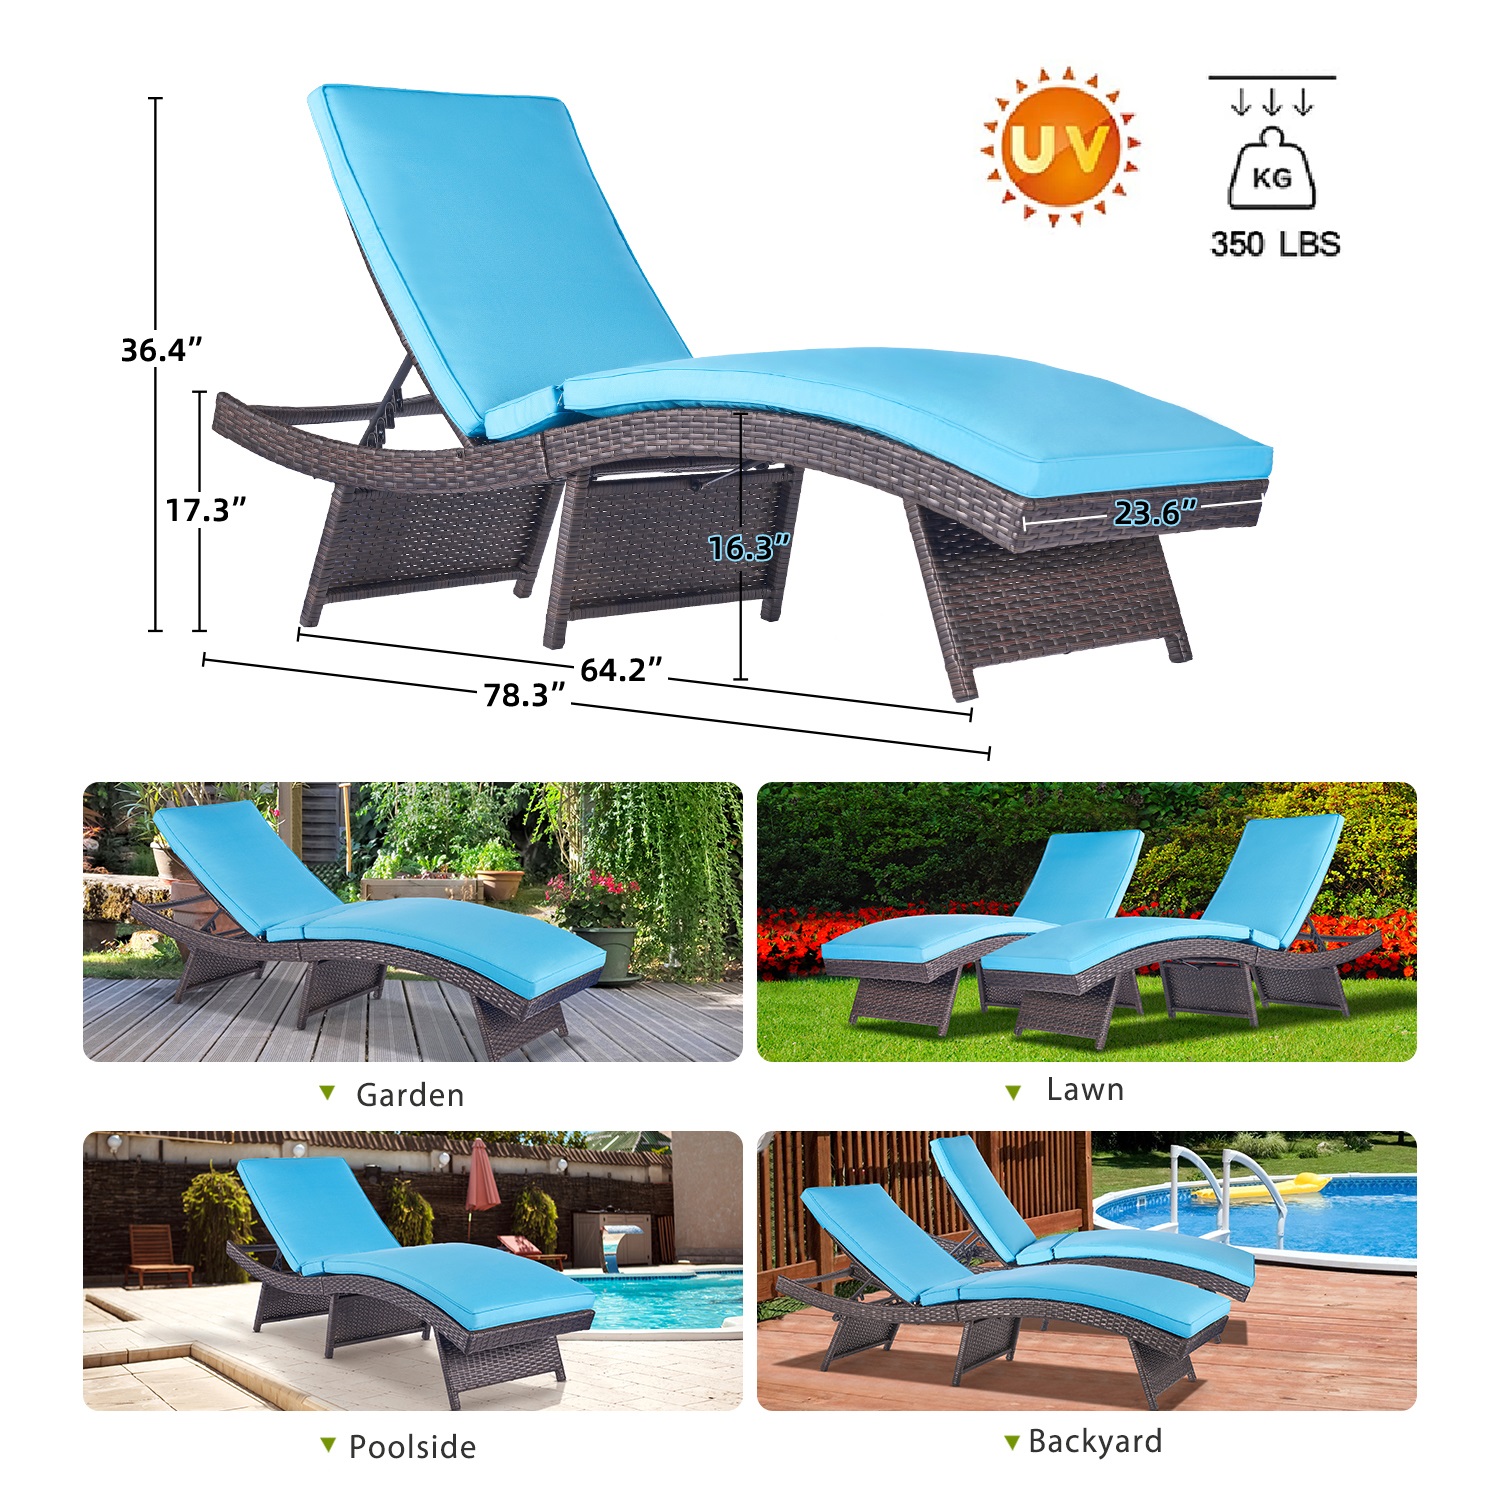 Chaise Lounge Chairs for Outside Foldable Outdoor Patio Wicker Lounge Chair Assembled Rattan Sunbathing Reclining Sunbed Layout Chair with Cushion Blue S Type Adjustable Backrest, No Assembly Required - image 5 of 7